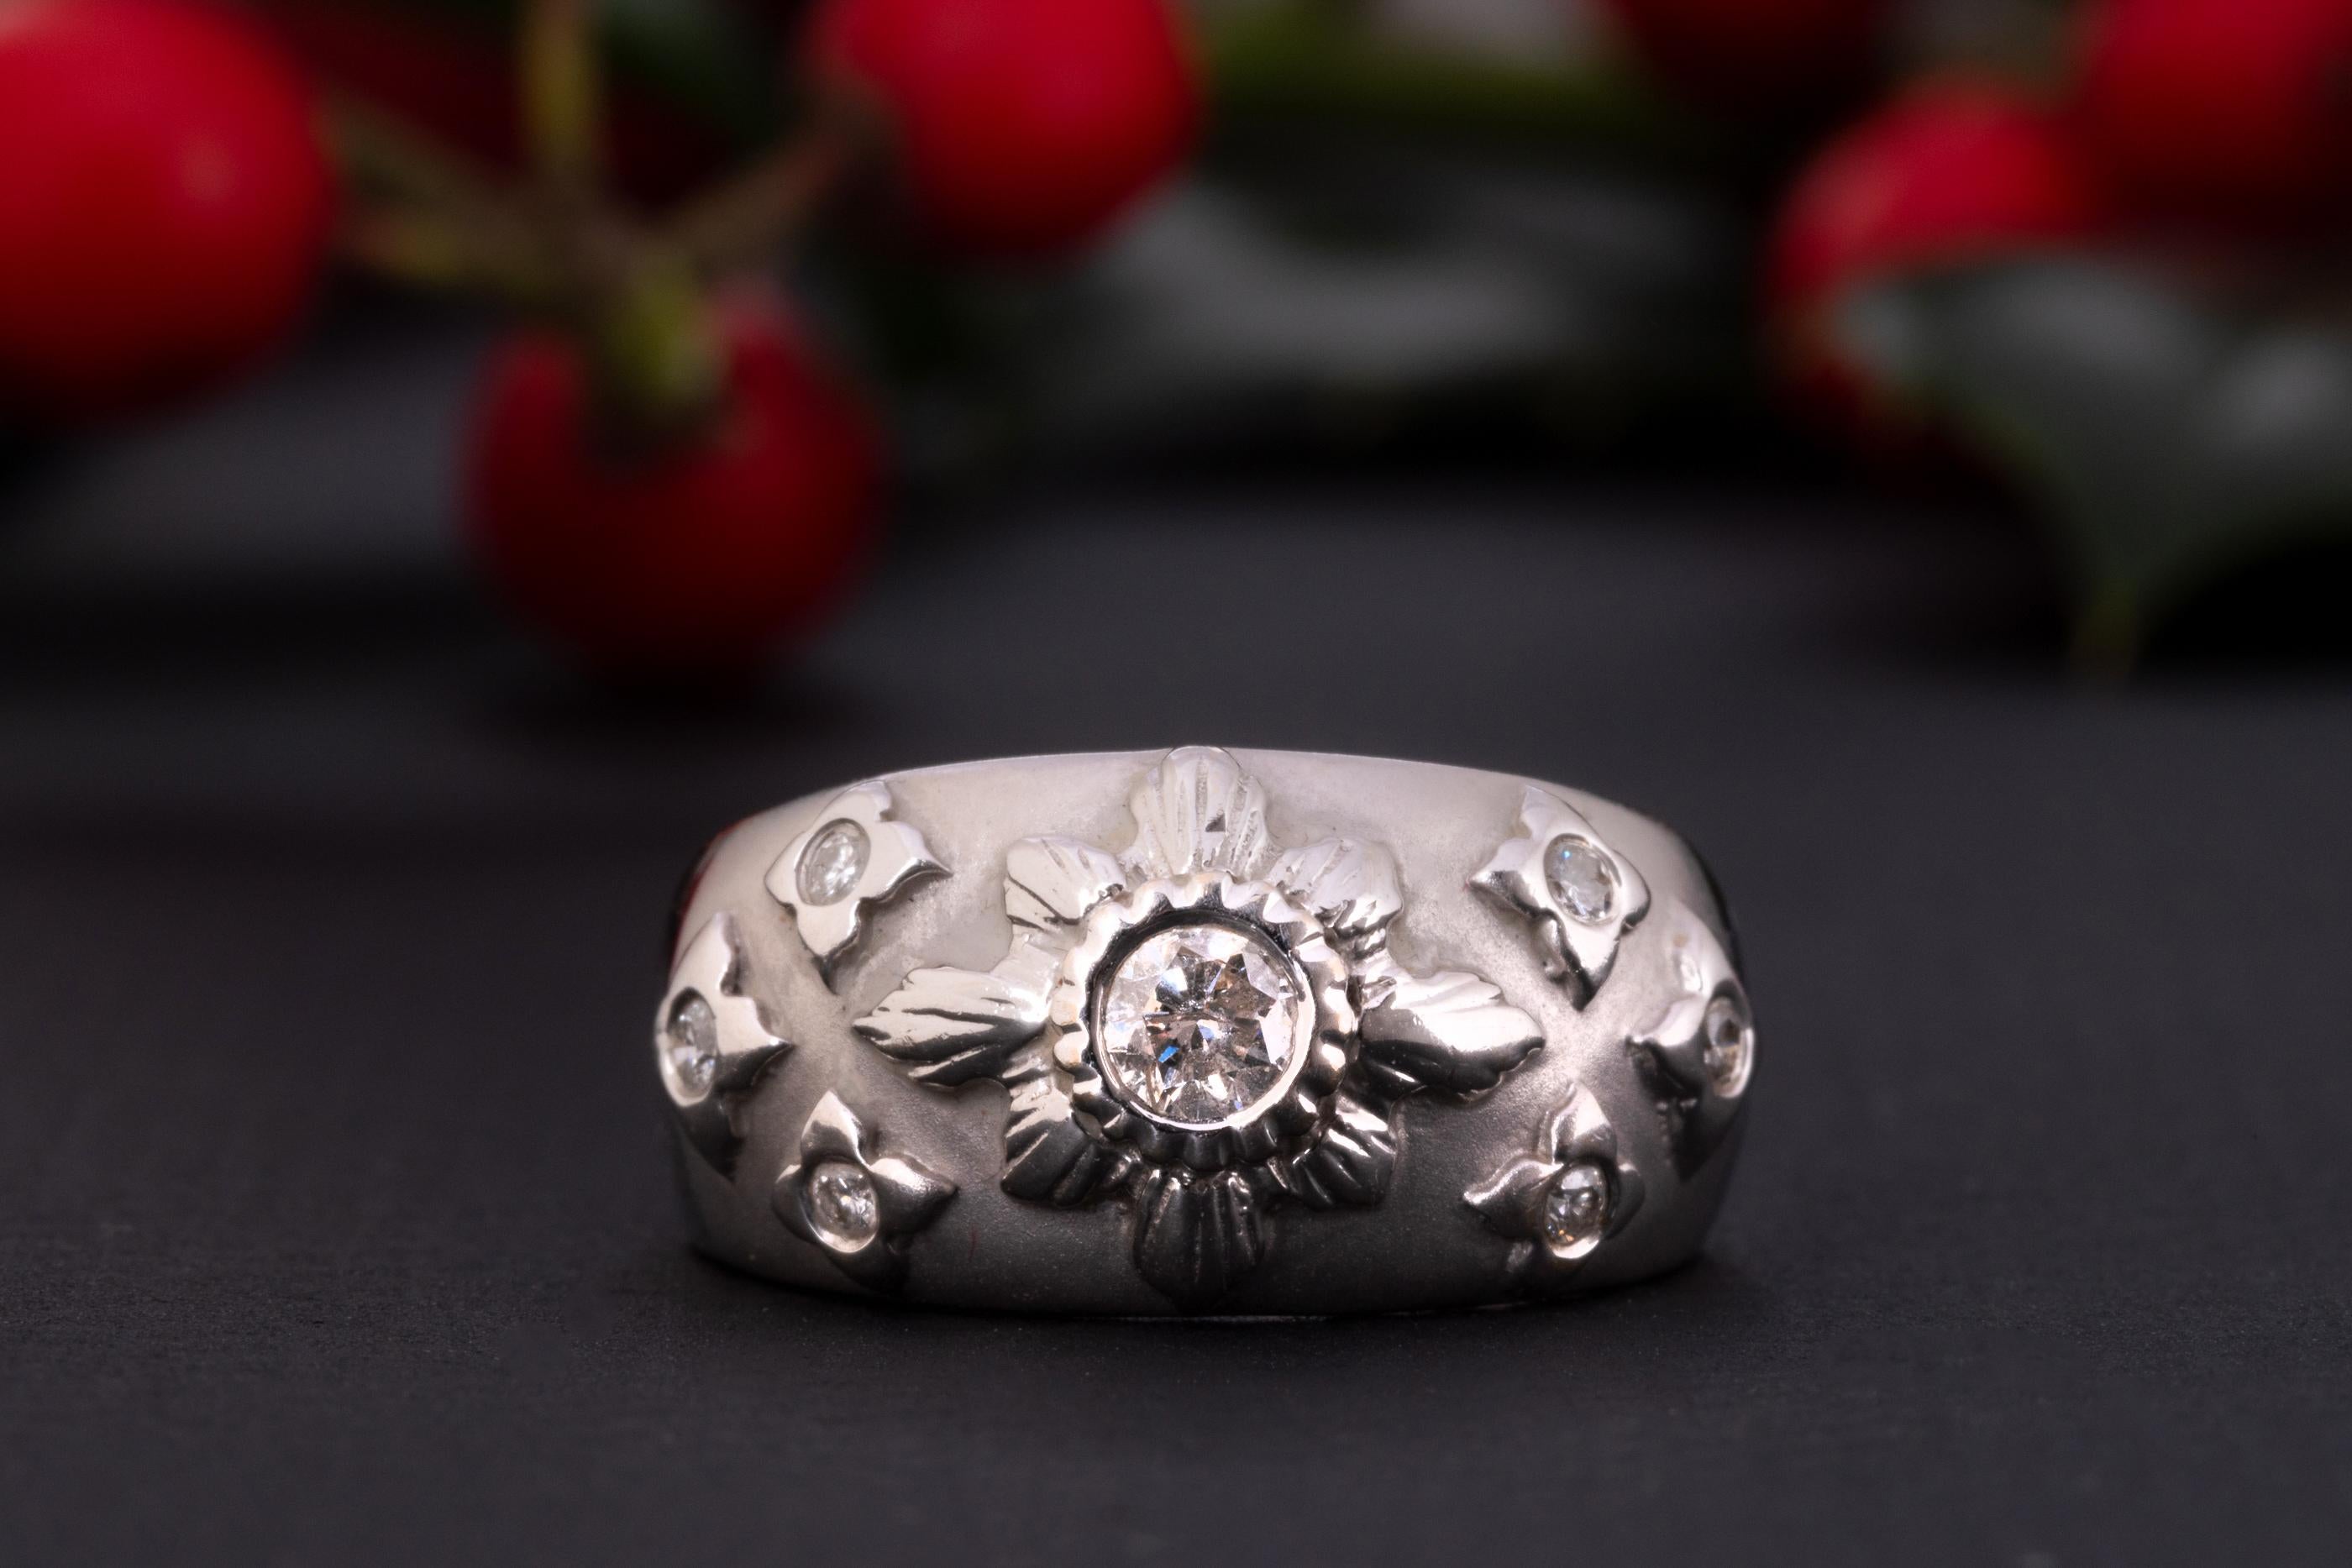 A white gold diamond starburst ring made of solid 18 ct gold and set with 0.35 ct worth of diamonds.

The shank of this celestial ring is rather wide and puffy, the front part is brushed and has a velvet-like gold texture. The celestial centerpiece